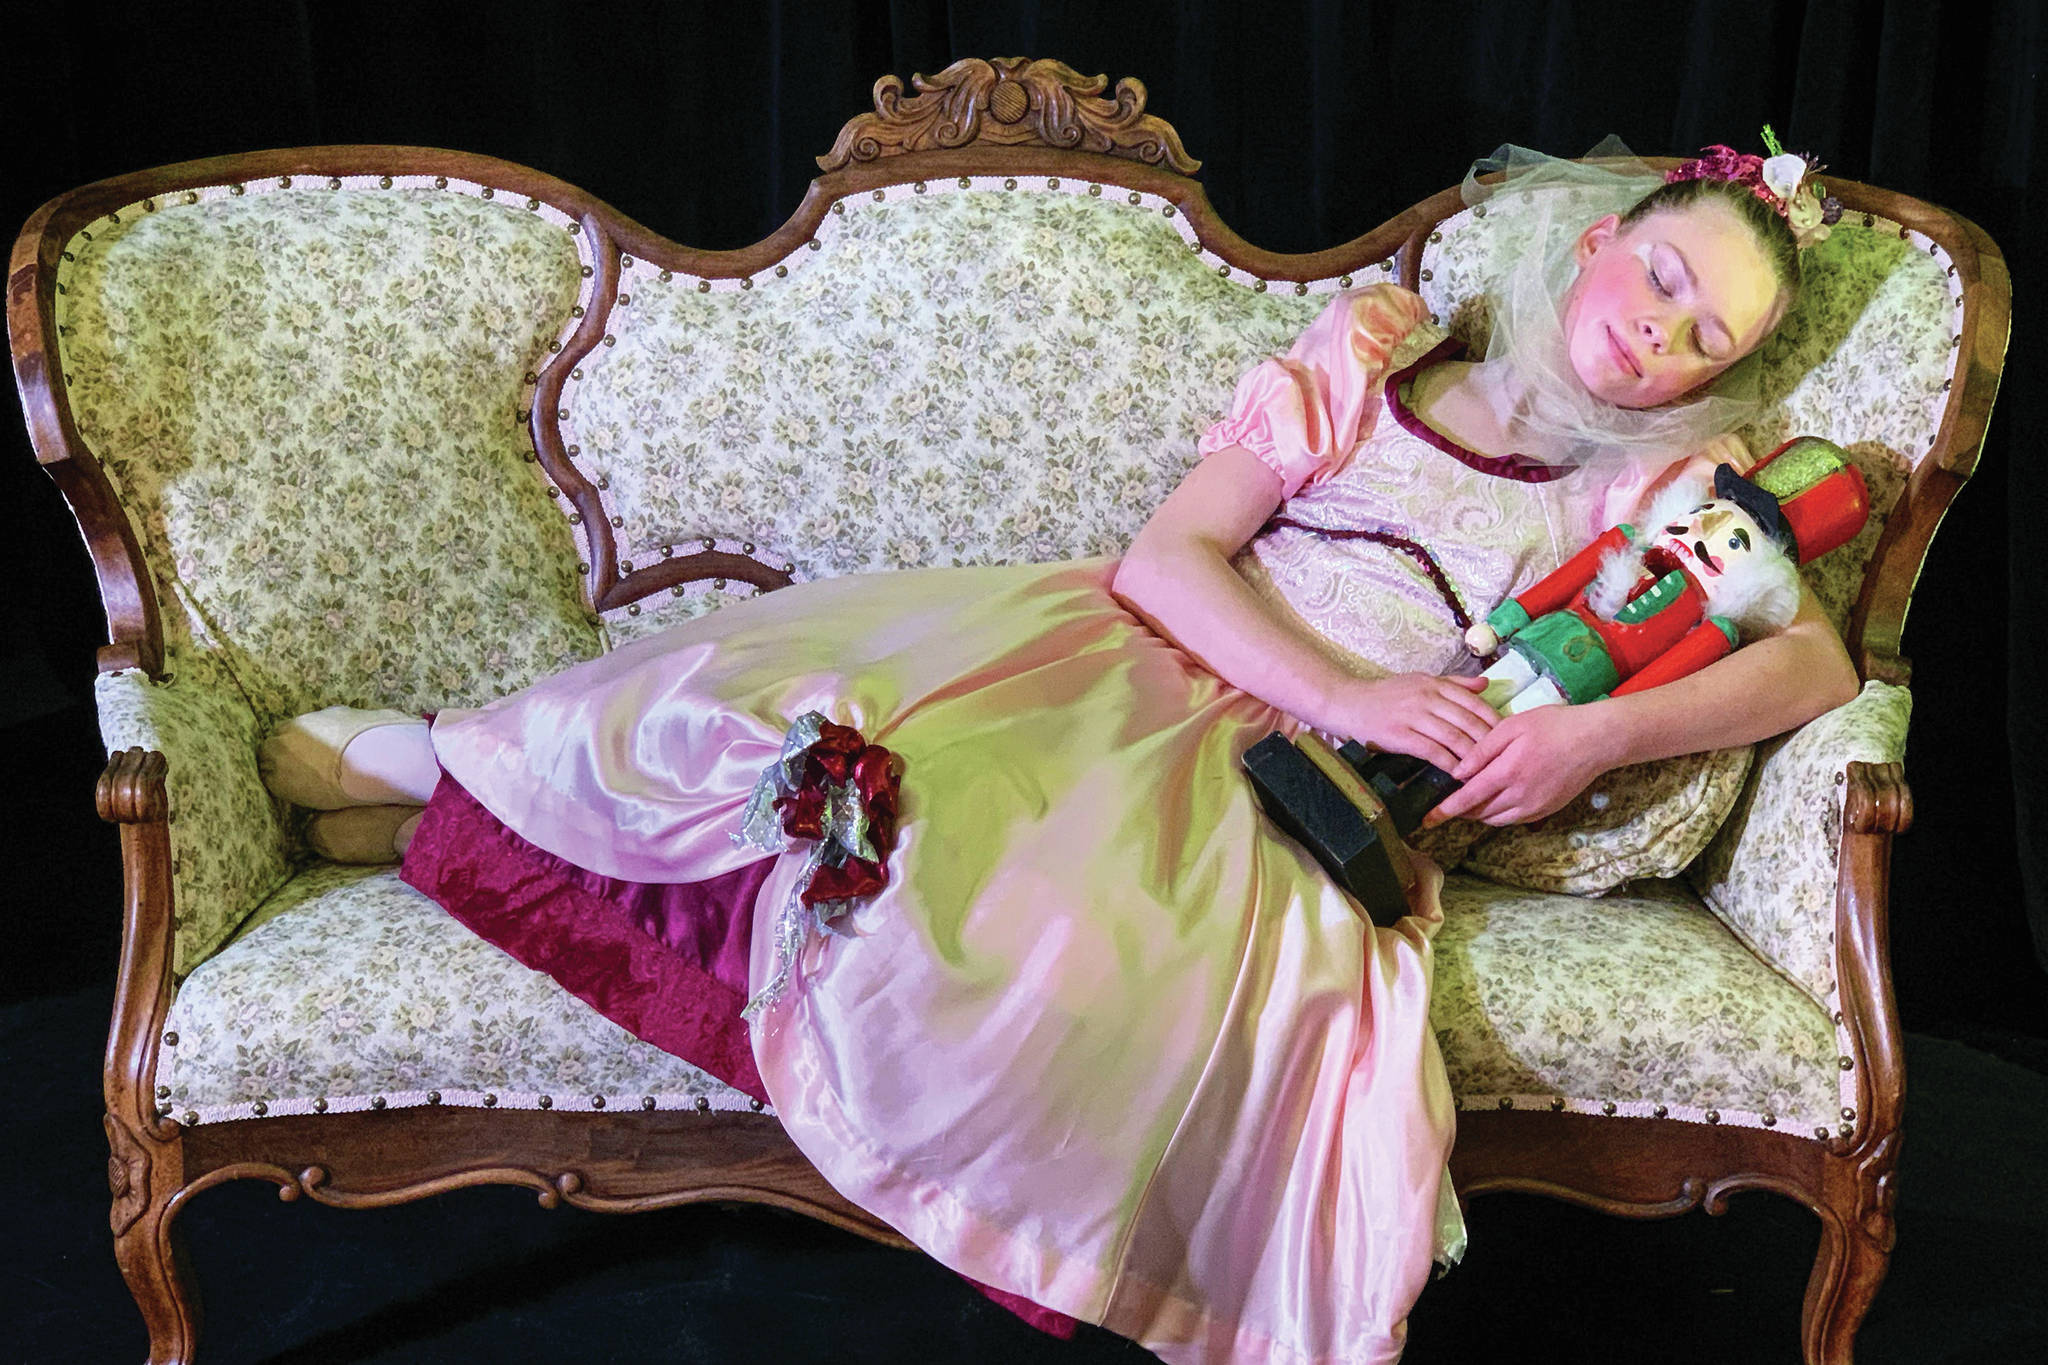 Swift Blackstock as Young Clara poses for a photo on Dec. 3, 2020 in the Petit Nutcracker Ballet at the Homer Nutcracker Productions' black box theater in the Wildberry Building in Homer, Alaska. (Photo by Jennifer Norton)